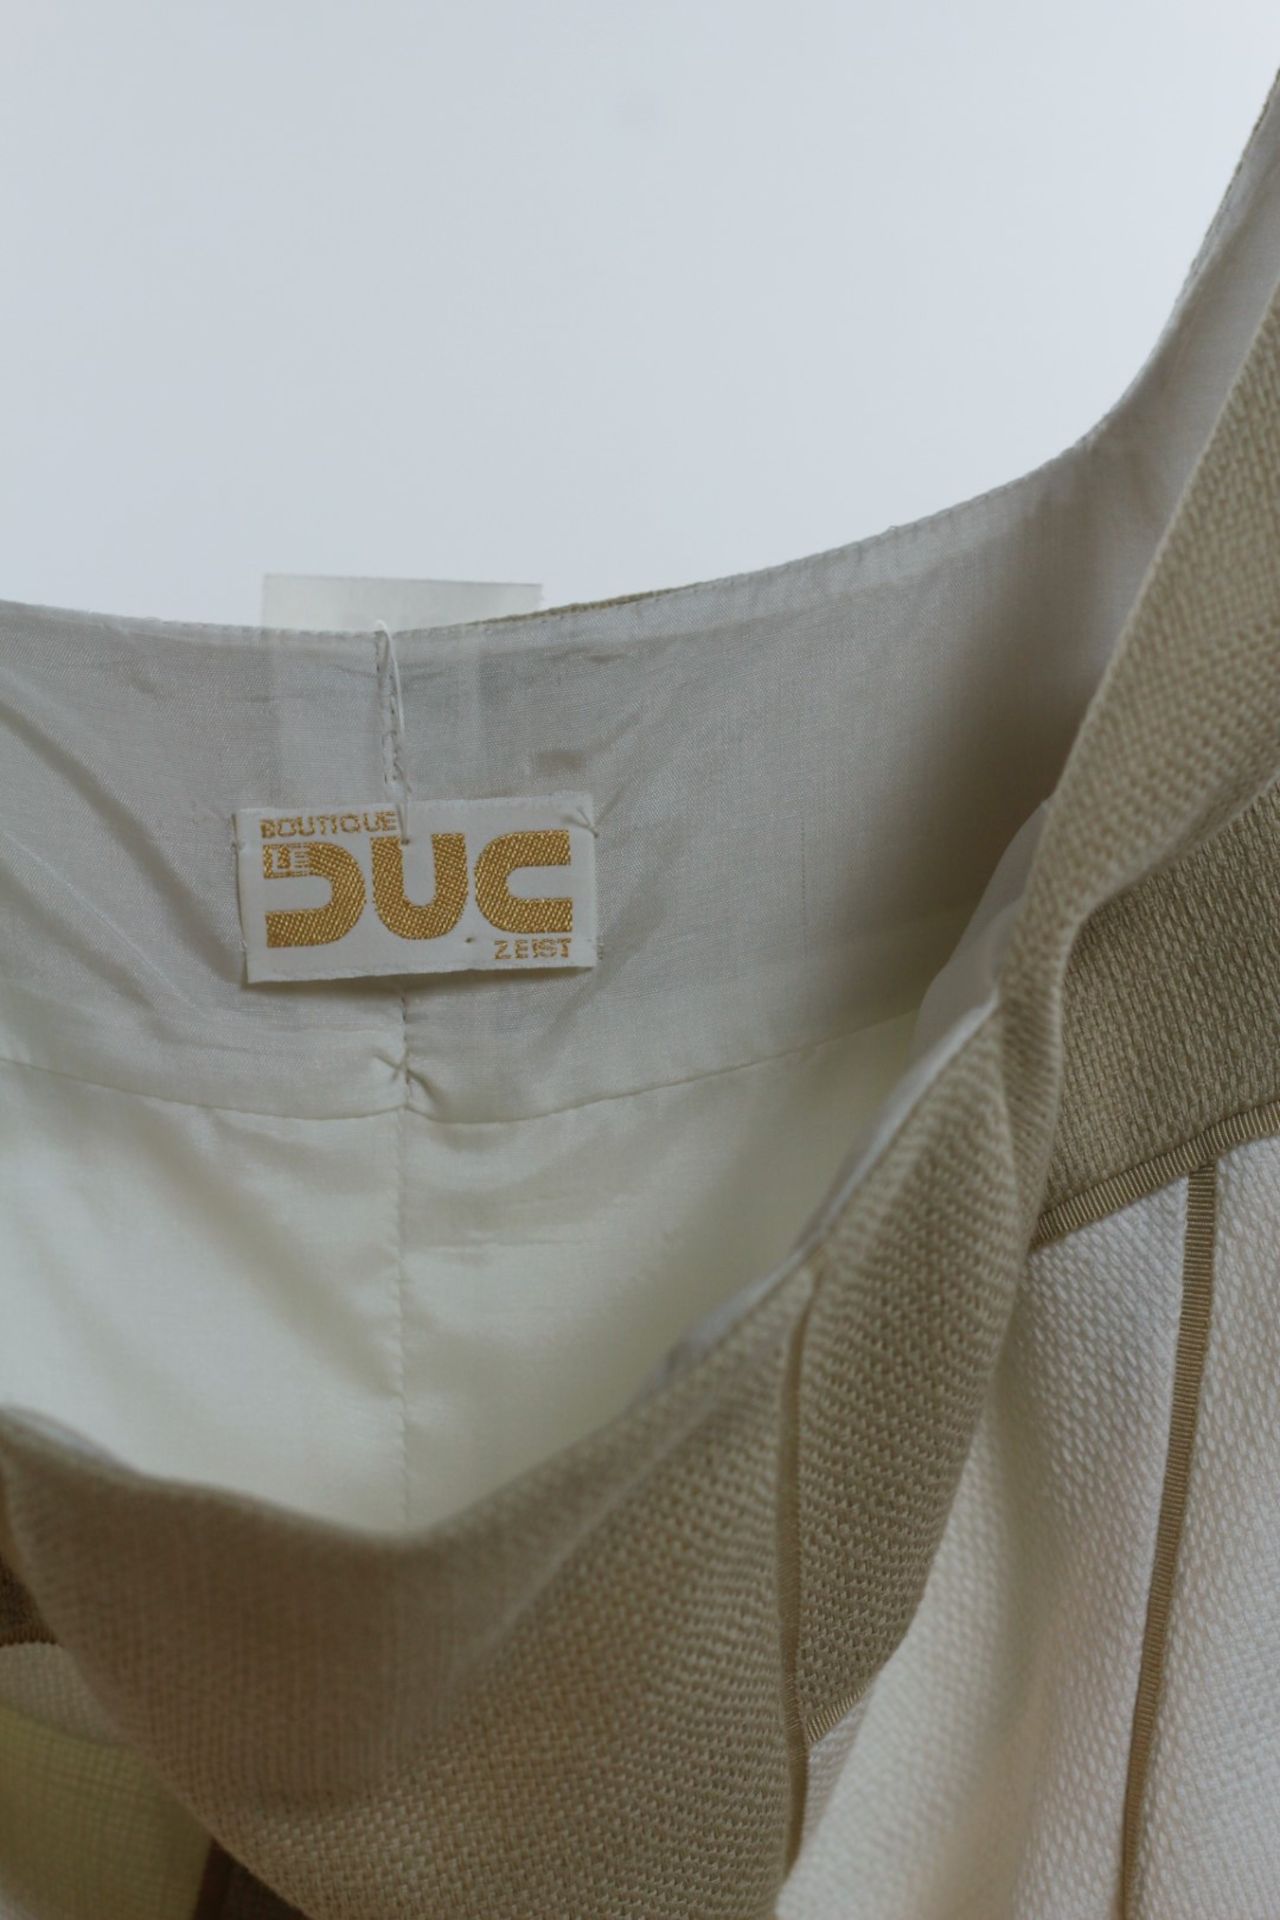 1 x Boutique Le Duc White/Faun Dress - Size: 12 - Material: 100% Cotton - From a High End Clothing - Image 9 of 14